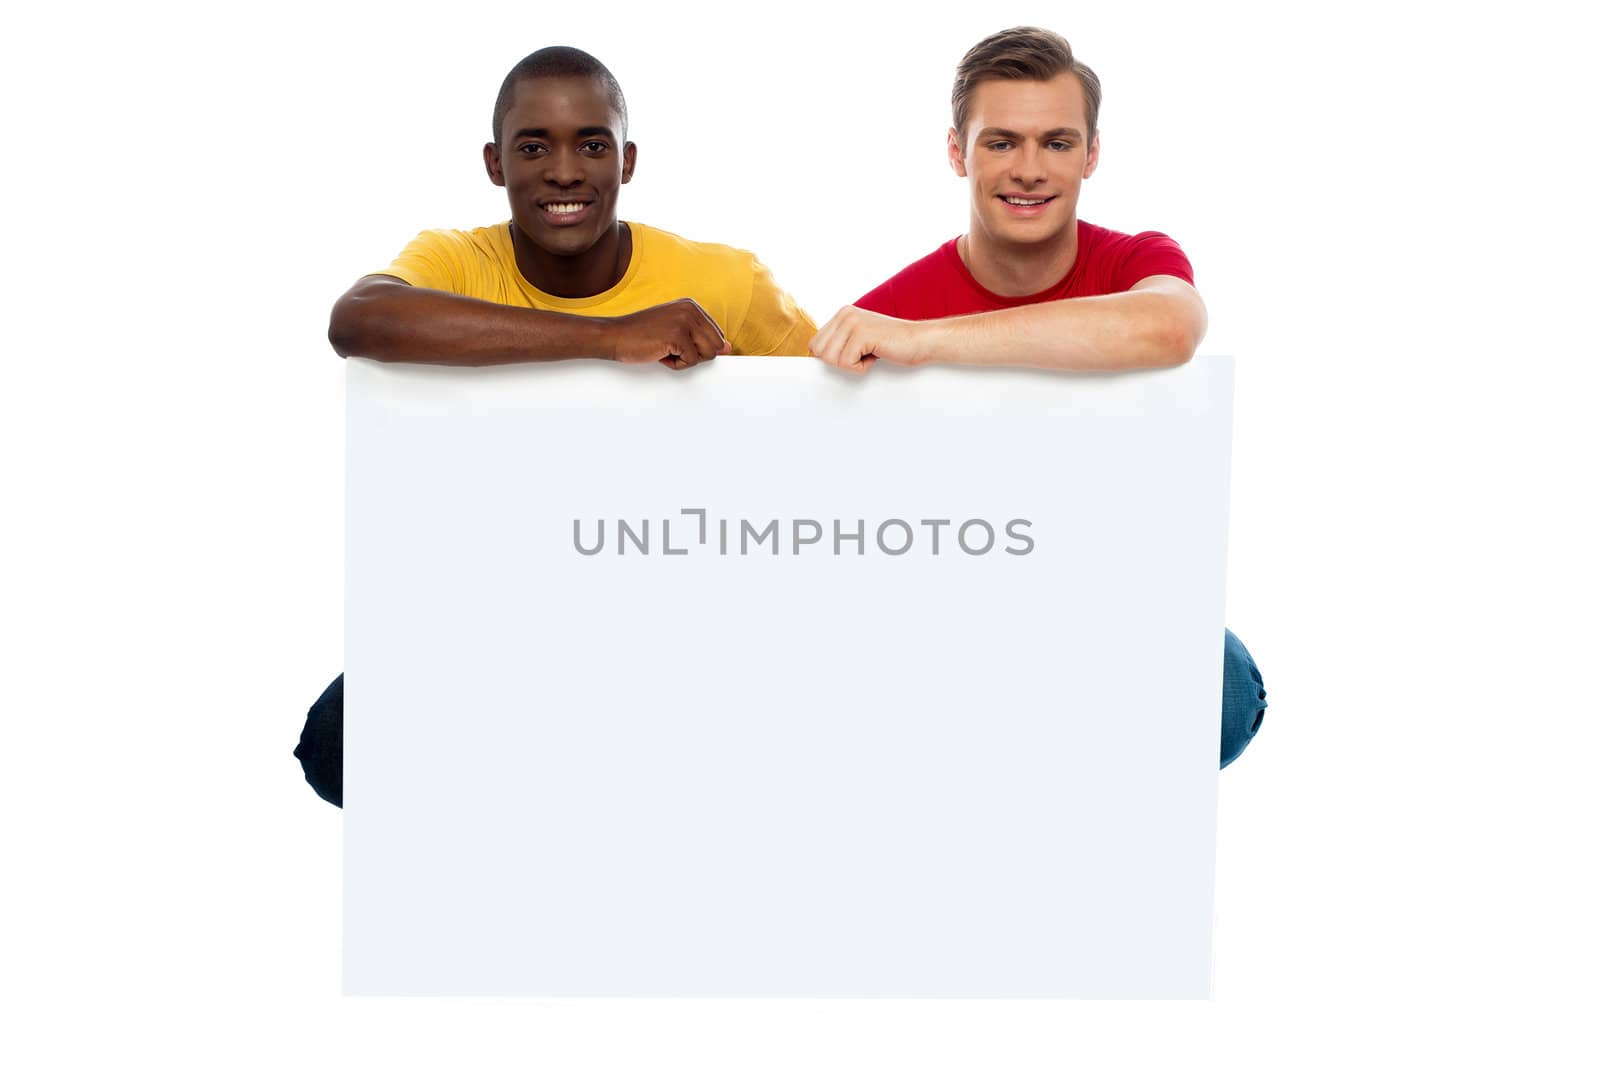 Casual young guys posing with blank billboard isolated against white background